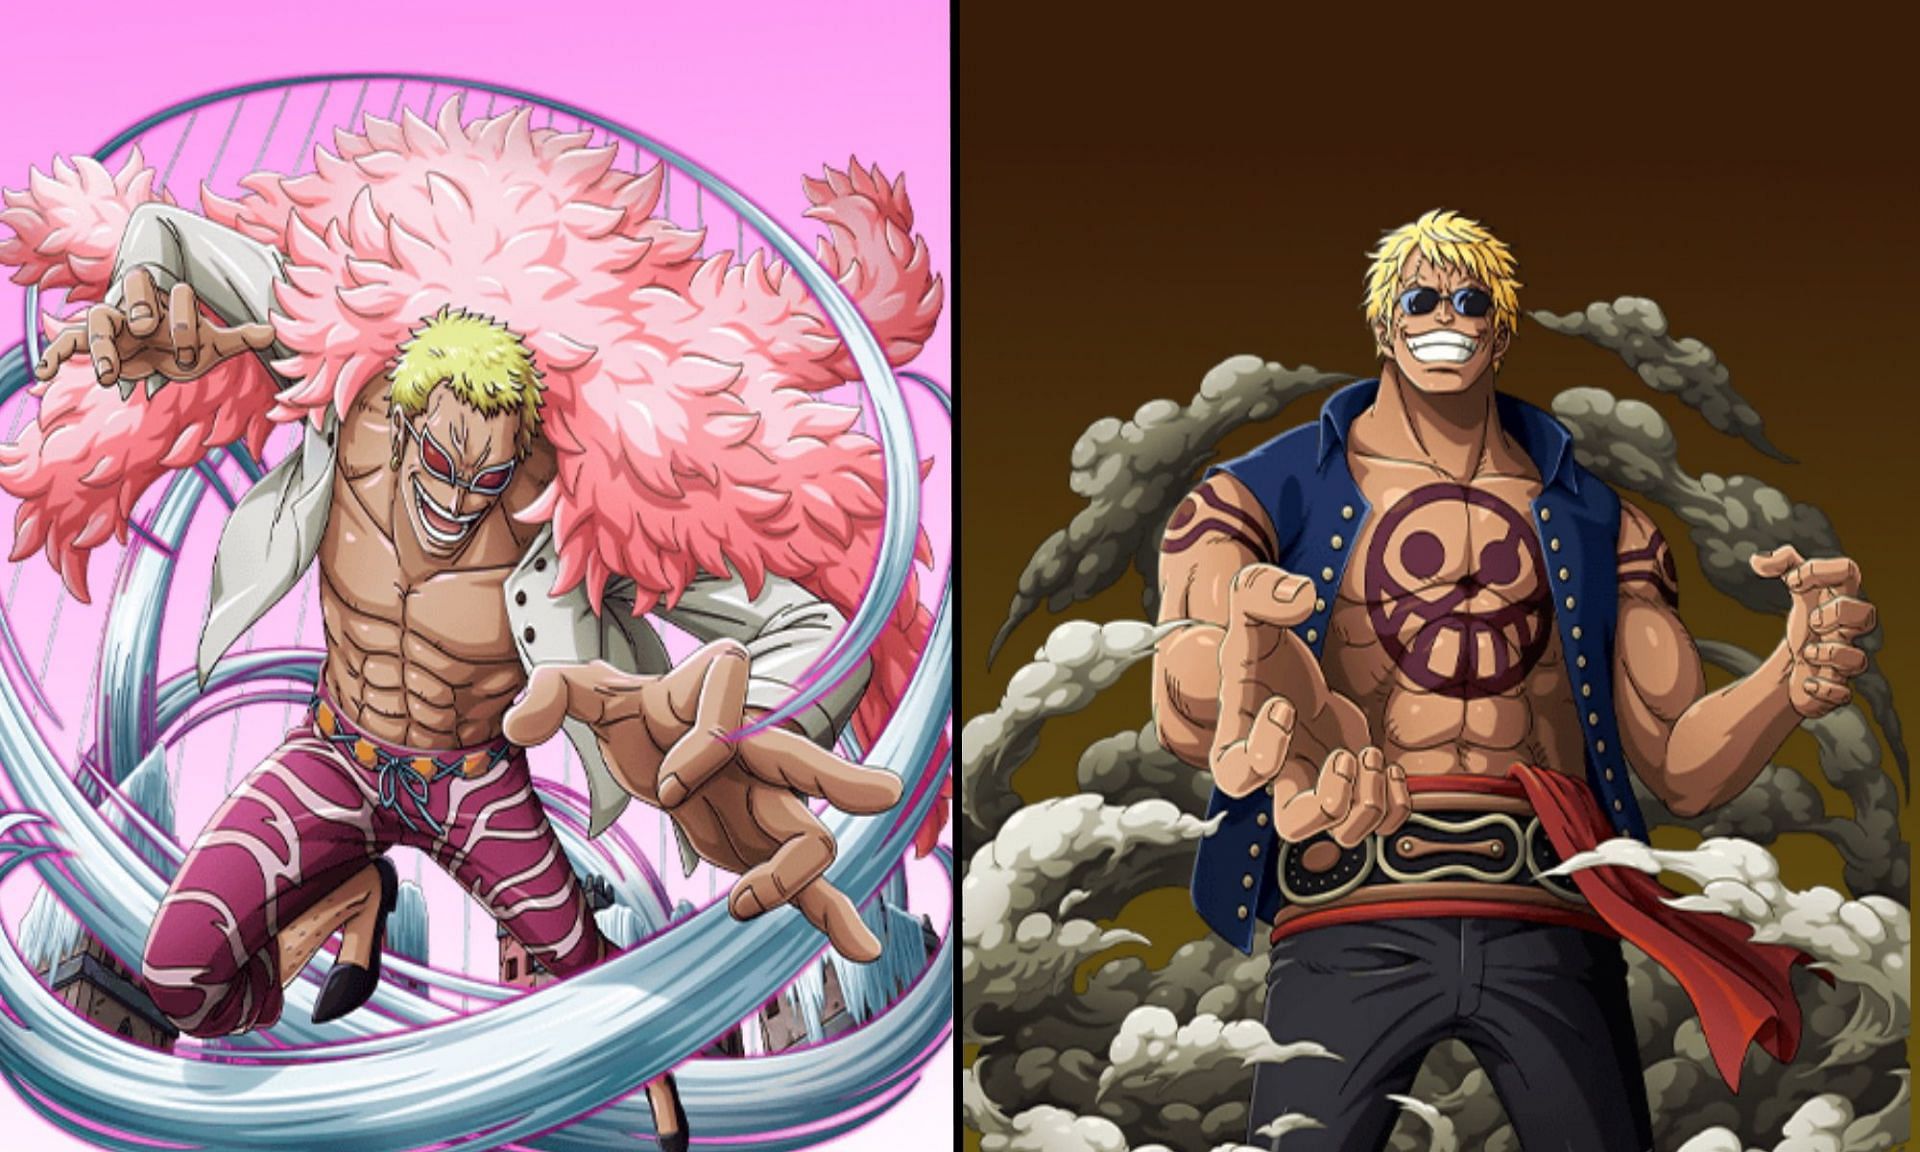 4 One Piece villains that lived up to the hype (and 4 that didn’t)